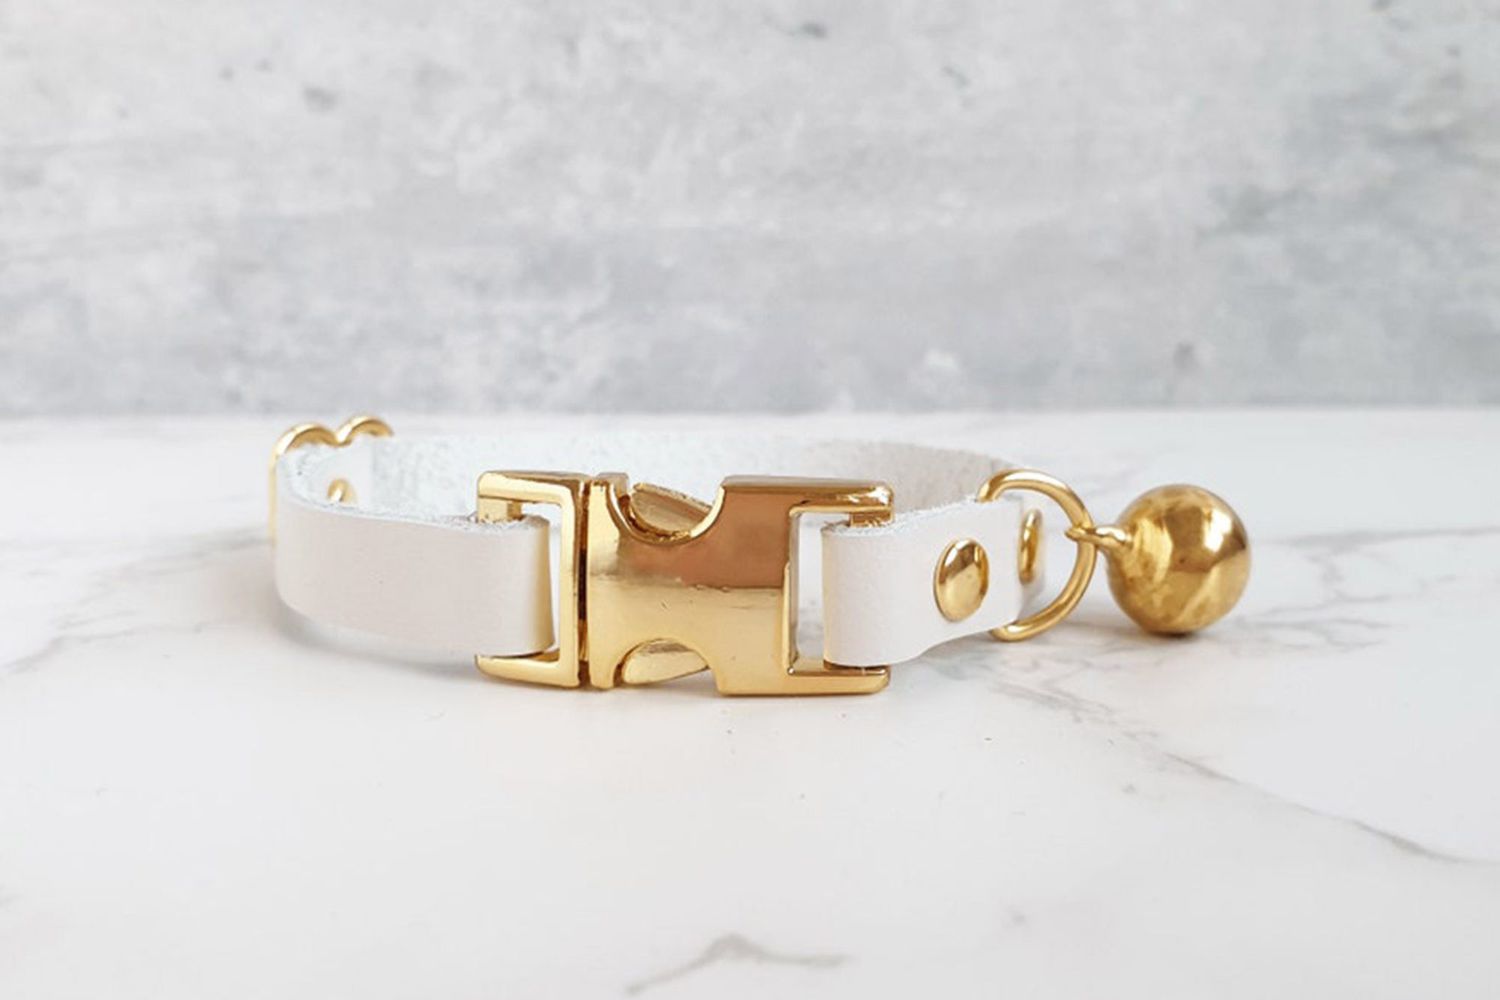 white leather kitten color with gold accents and bell